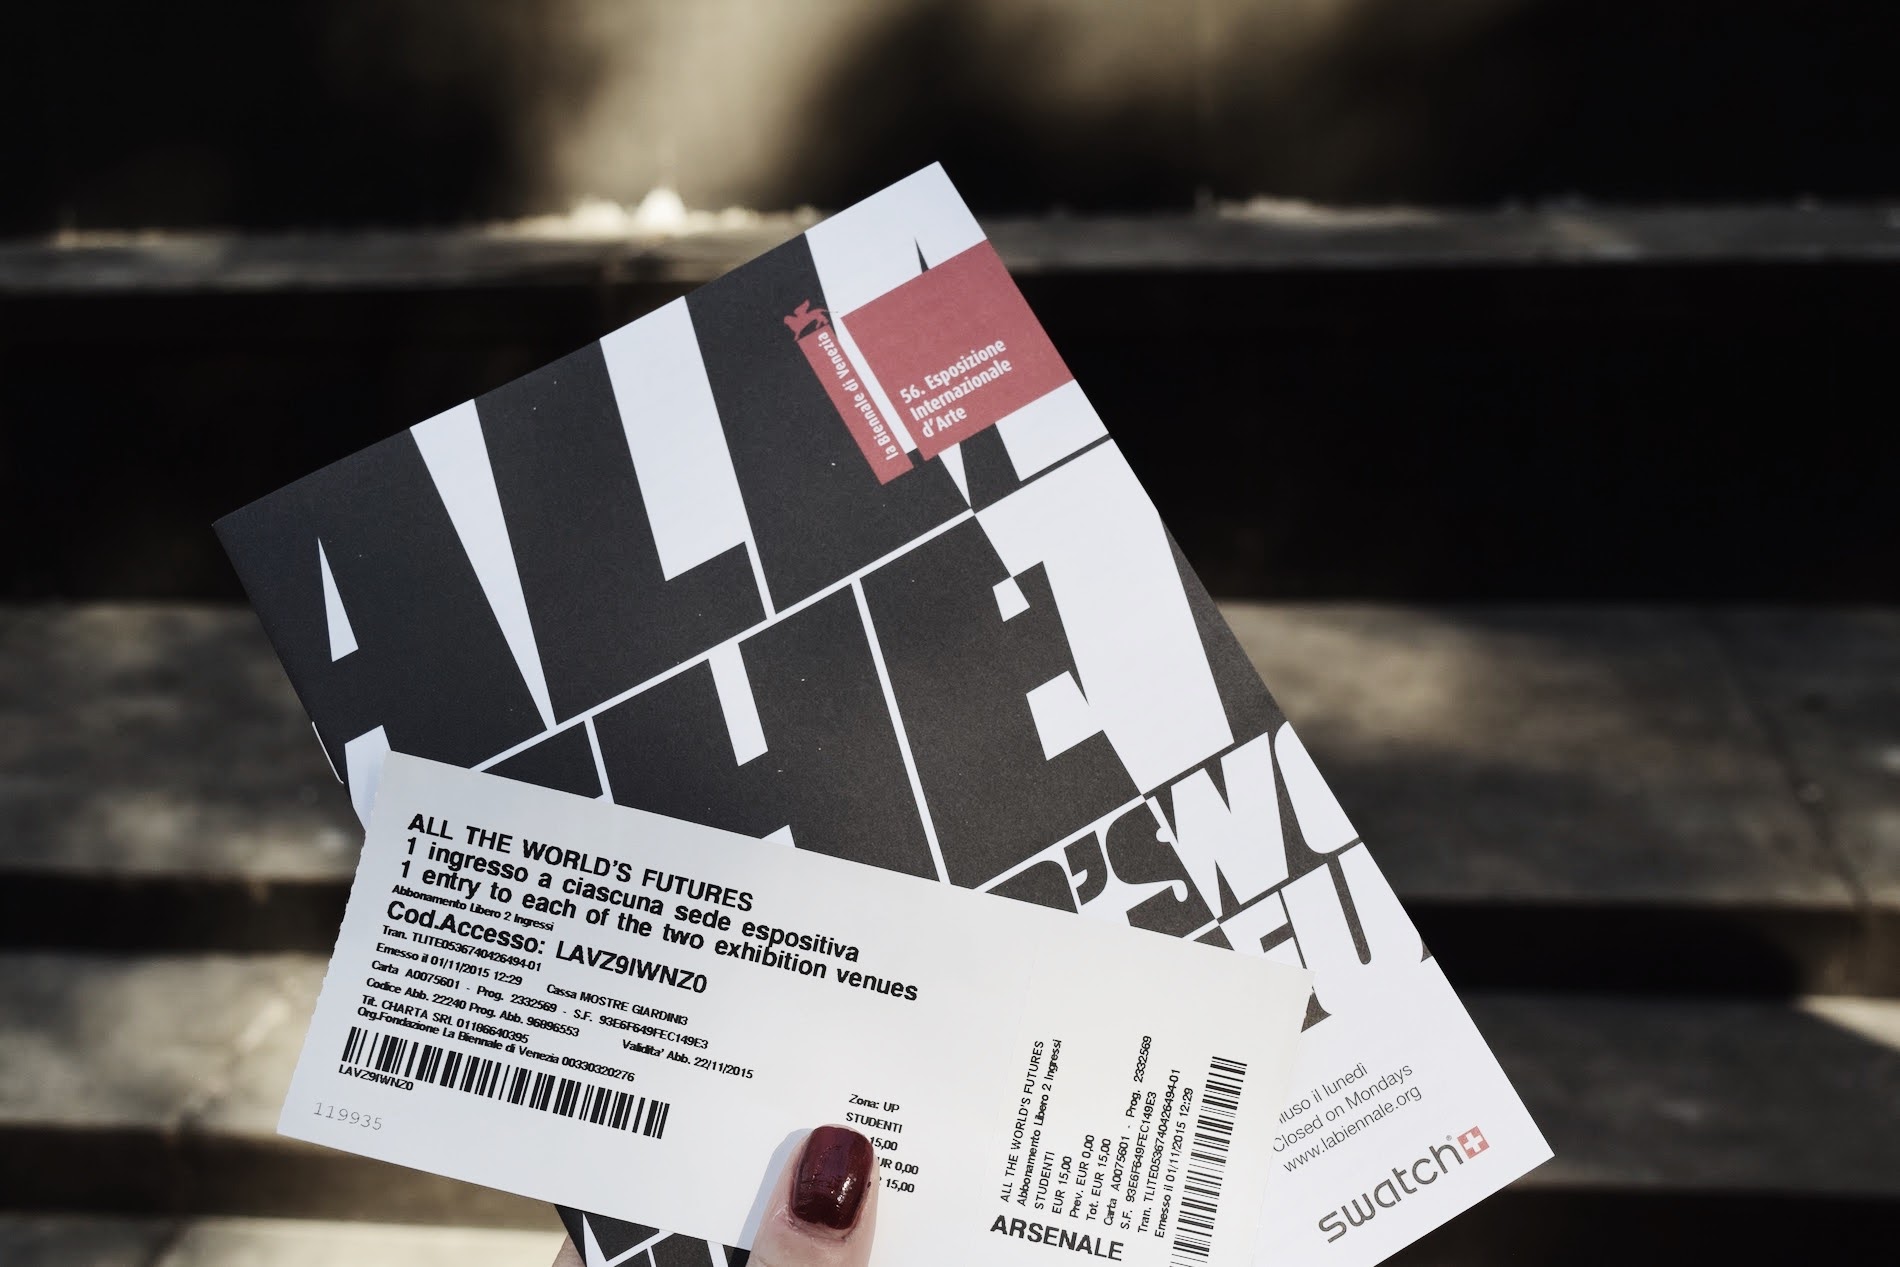 Venice Biennale Tickets and Guide